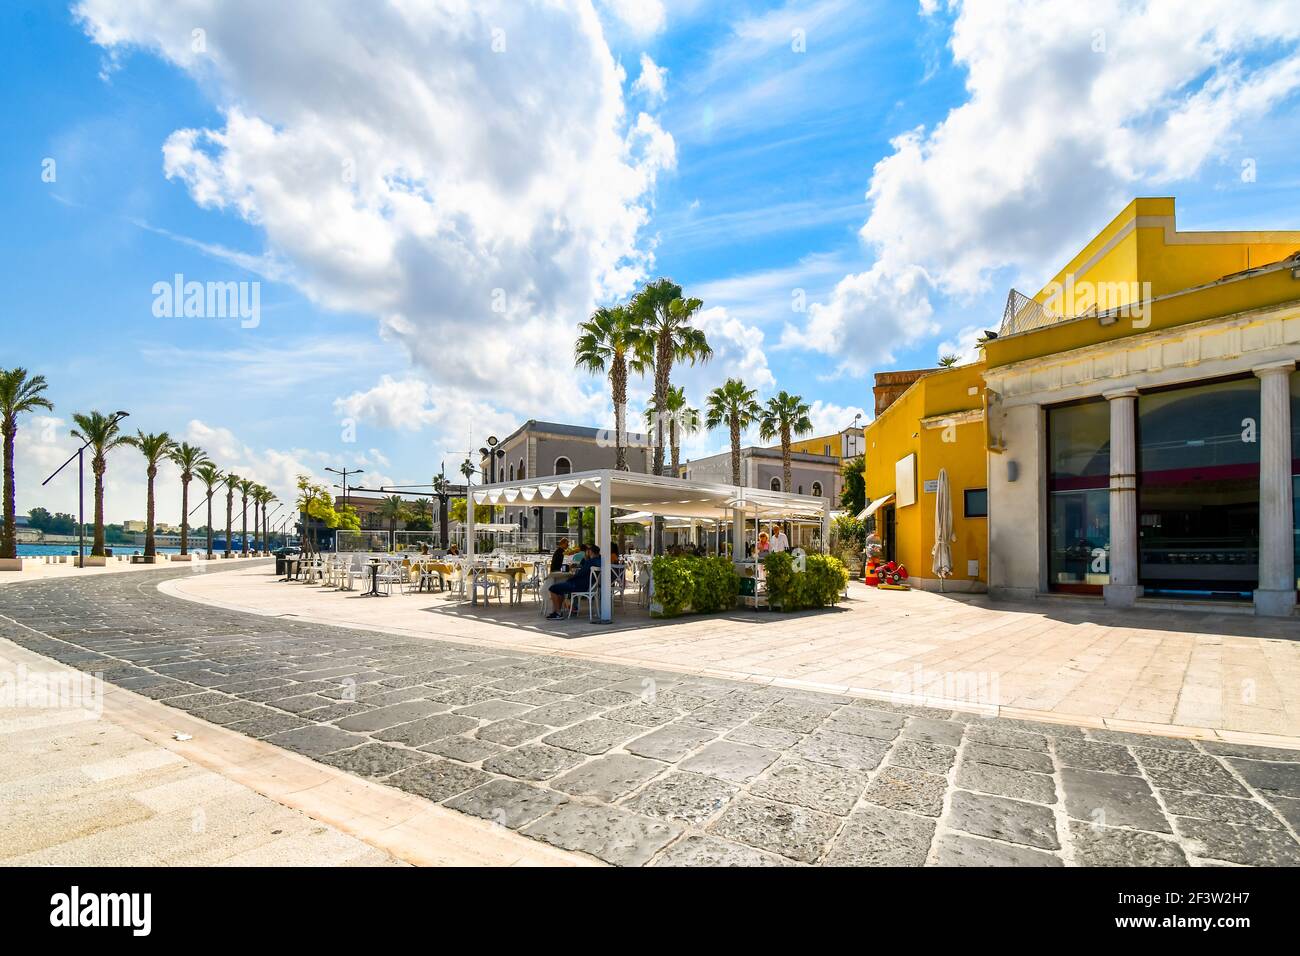 The waterfront harbor and port promenade at the coastal city of Brindisi, Italy, in the Puglia region. Stock Photo